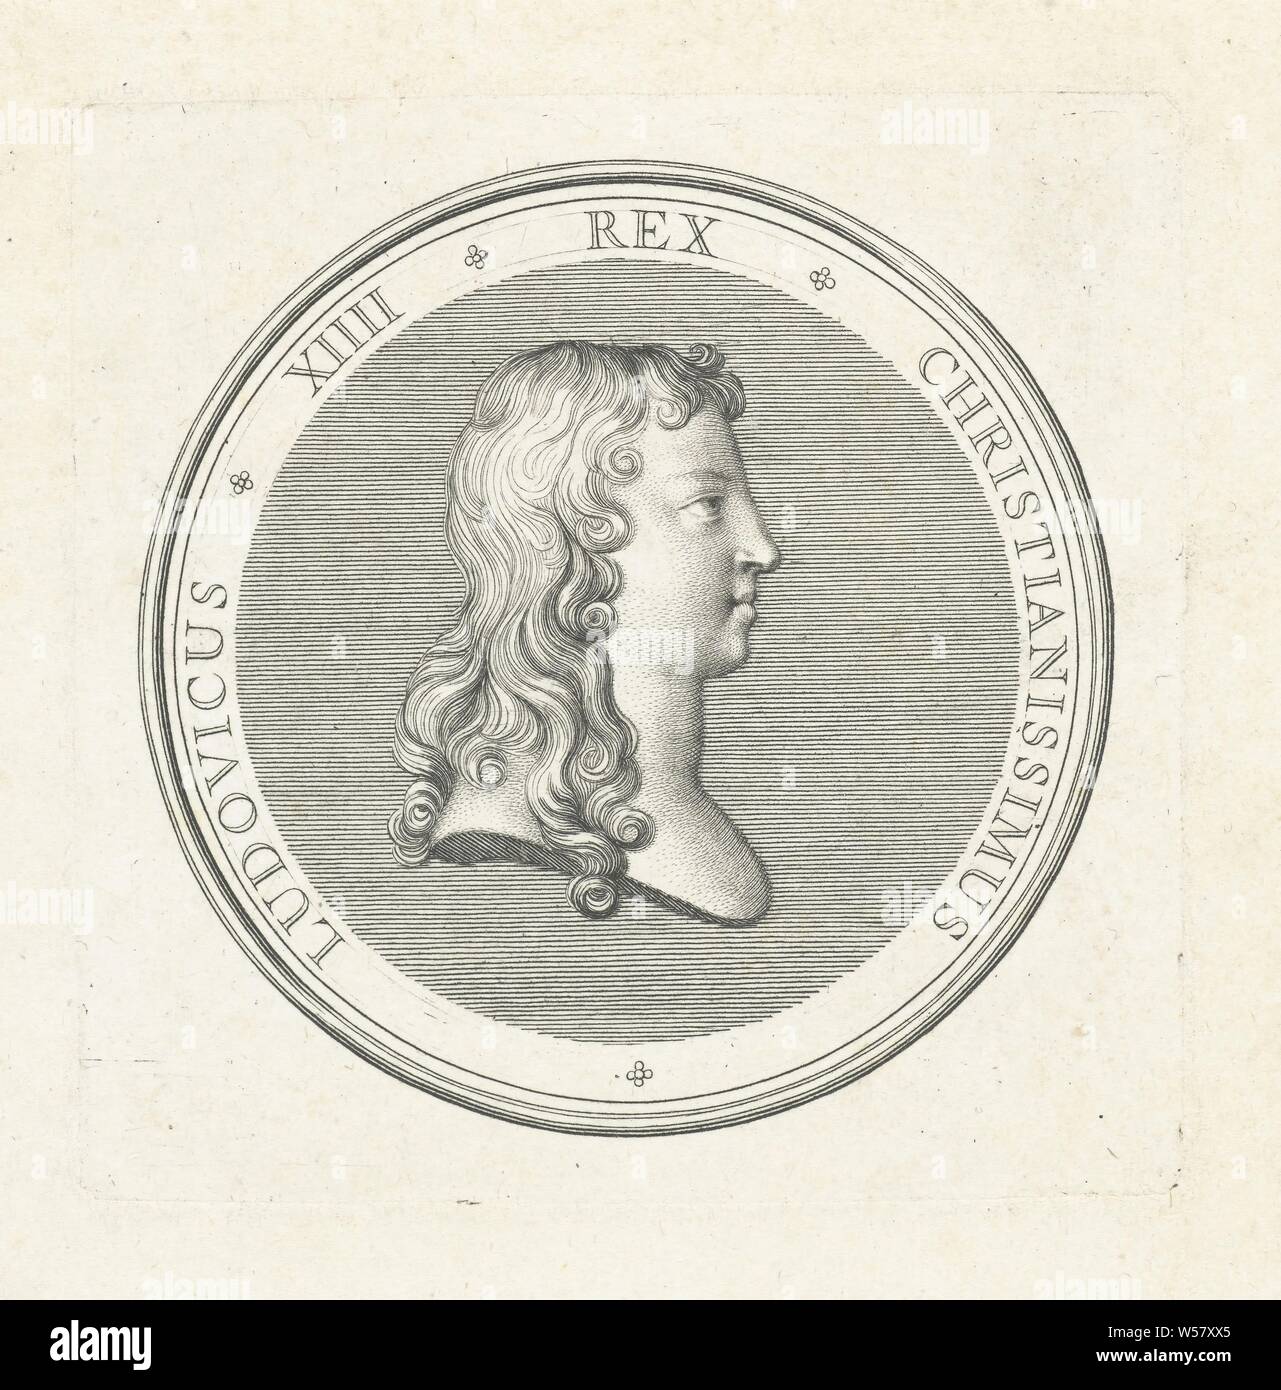 Medal with bust of Louis XIV, Front of a bust with profile and profile of Louis XIV, first issued on the occasion of the regency of his mother in 1643, Louis XIV (King of France), Gerard Edelinck, Paris, 1702, paper, engraving, h 83 mm × w 82 mm Stock Photo